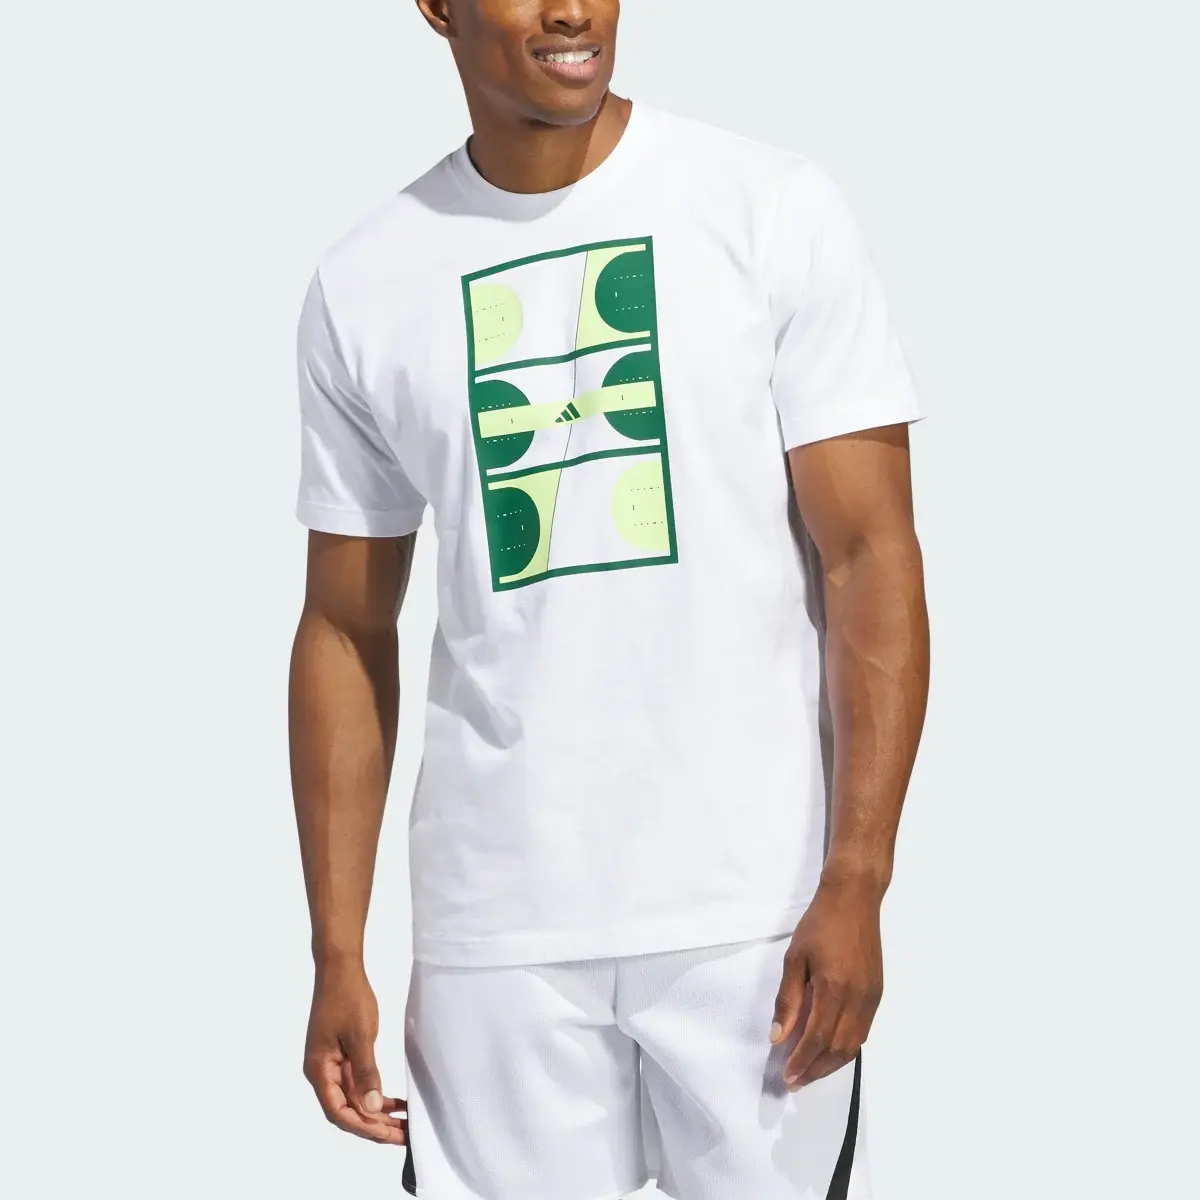 Adidas Global Courts Graphic Tee. 1